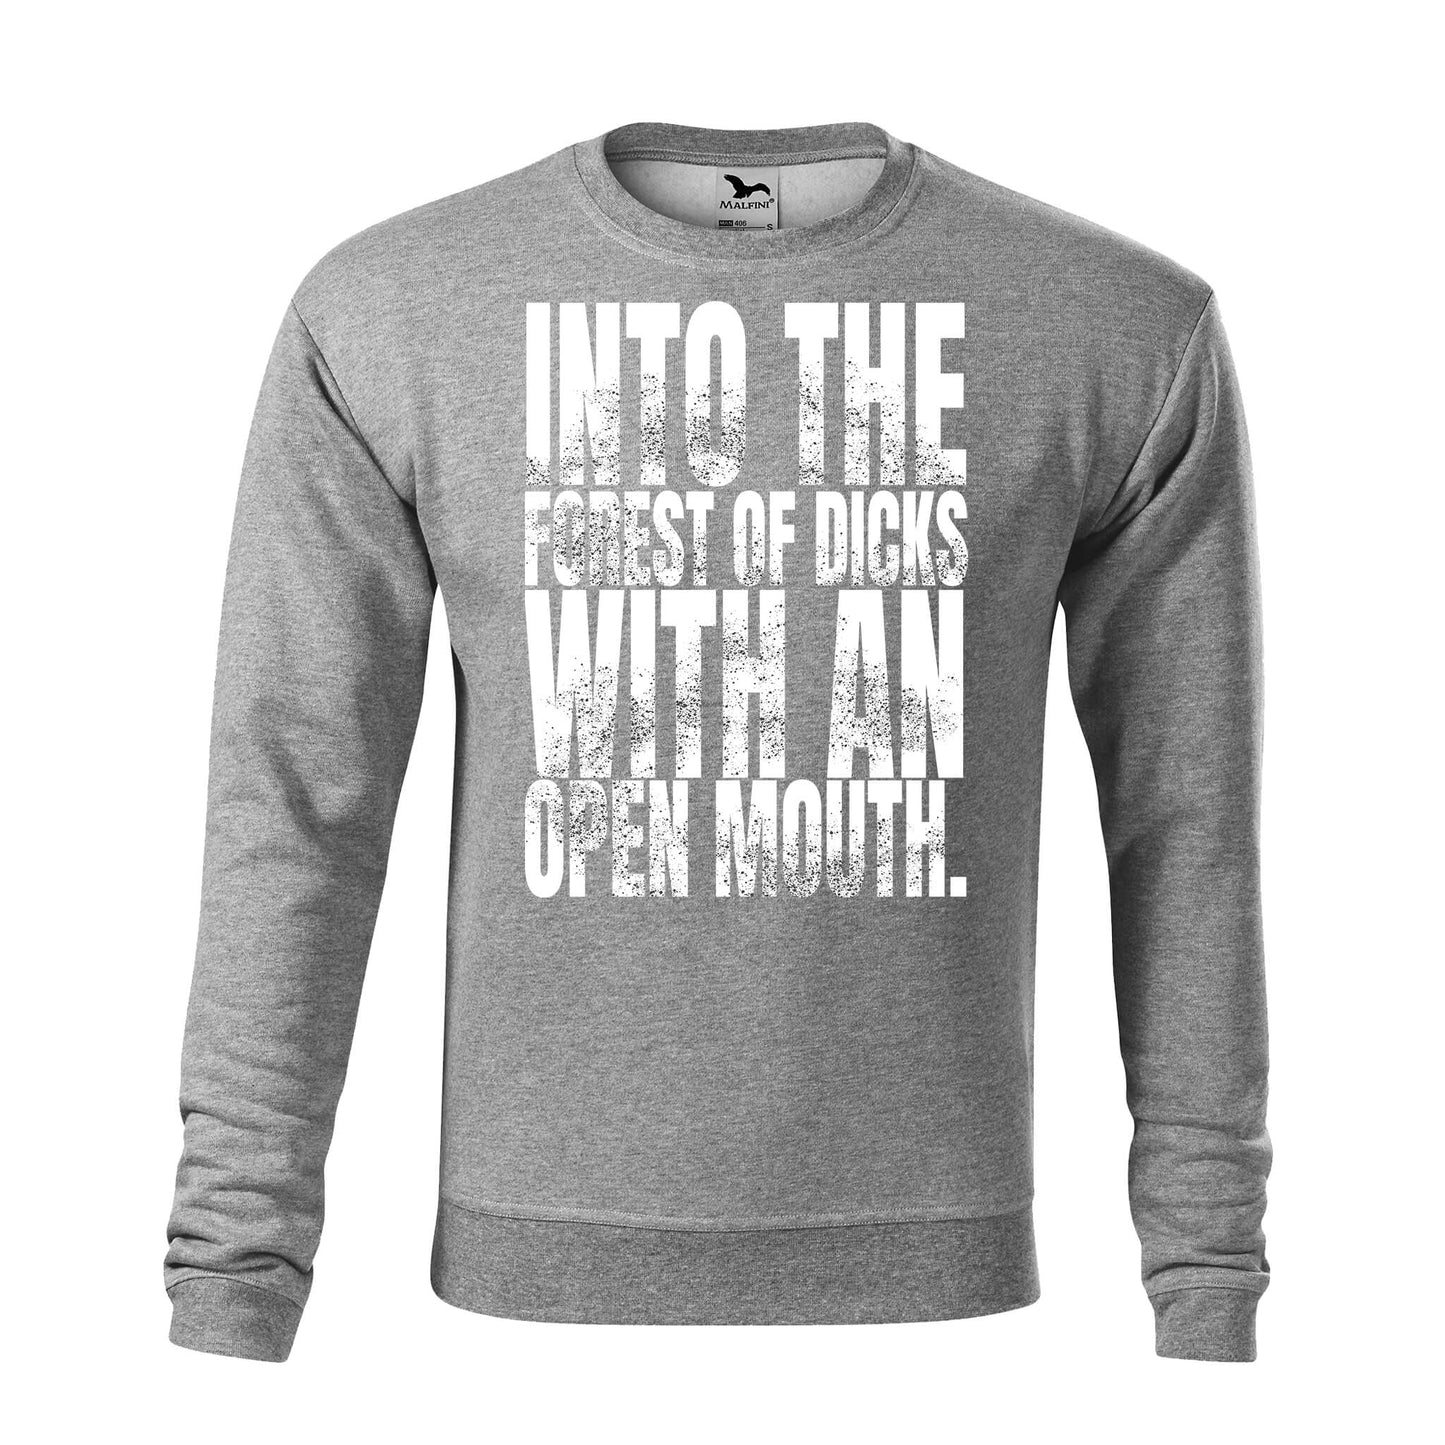 Into the forest of dicks with an open mouth sweatshirt - rvdesignprint